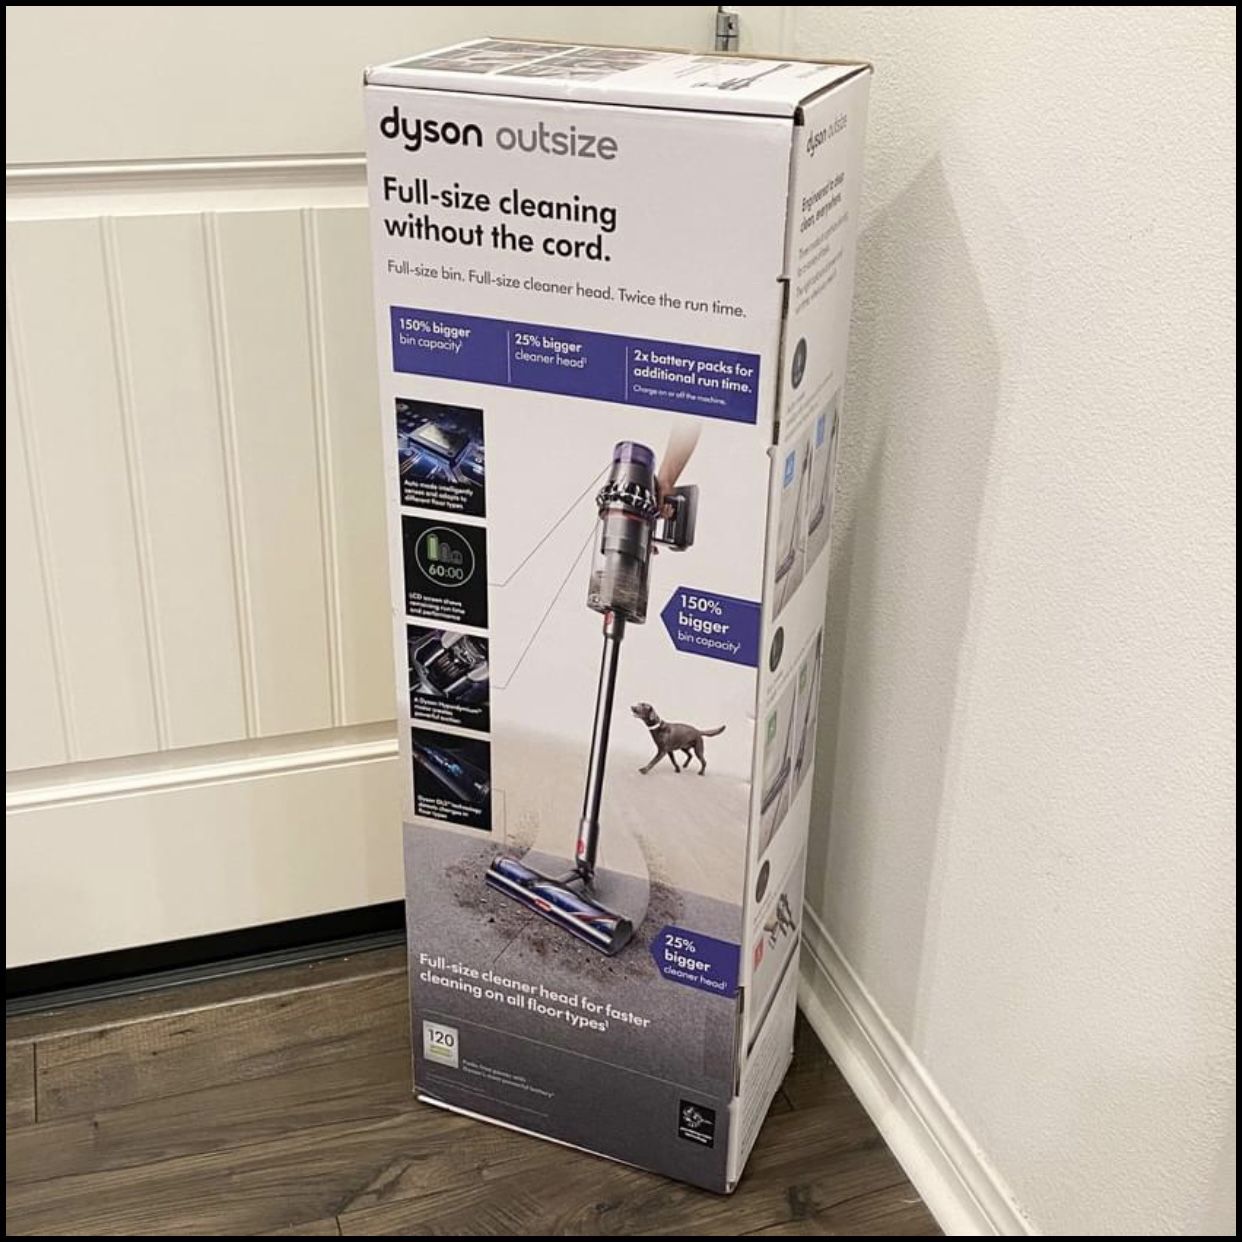 NEW Dyson Cyclone Outsize Cordless Stick Vacuum Cleaner. Black / Gray. Im also selling v11 outsize.